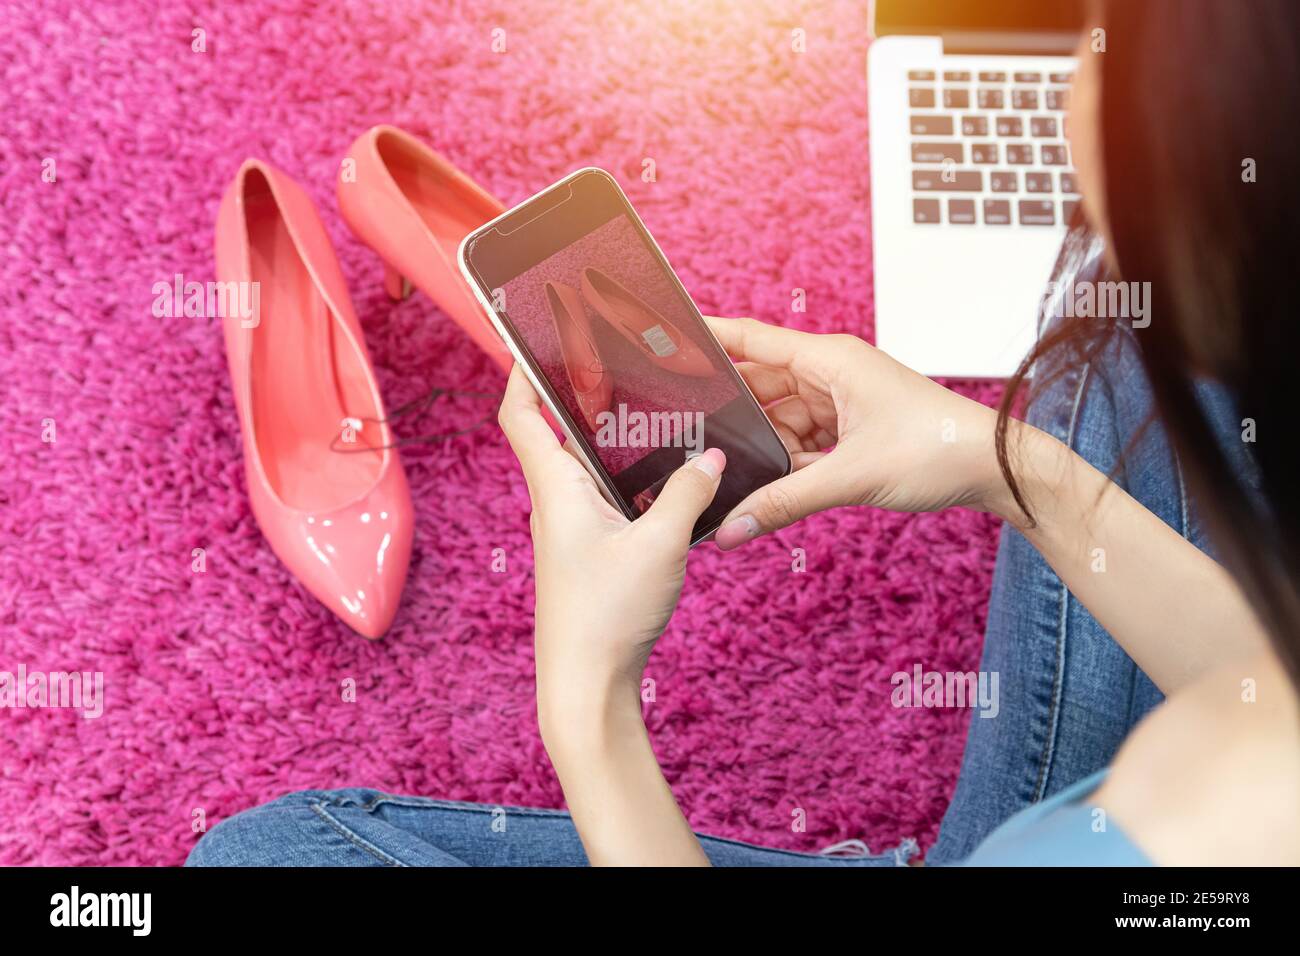 selling online idea concept. online seller use mobile phone take a photo of high heels shoe for upload to online shopping store website. Stock Photo